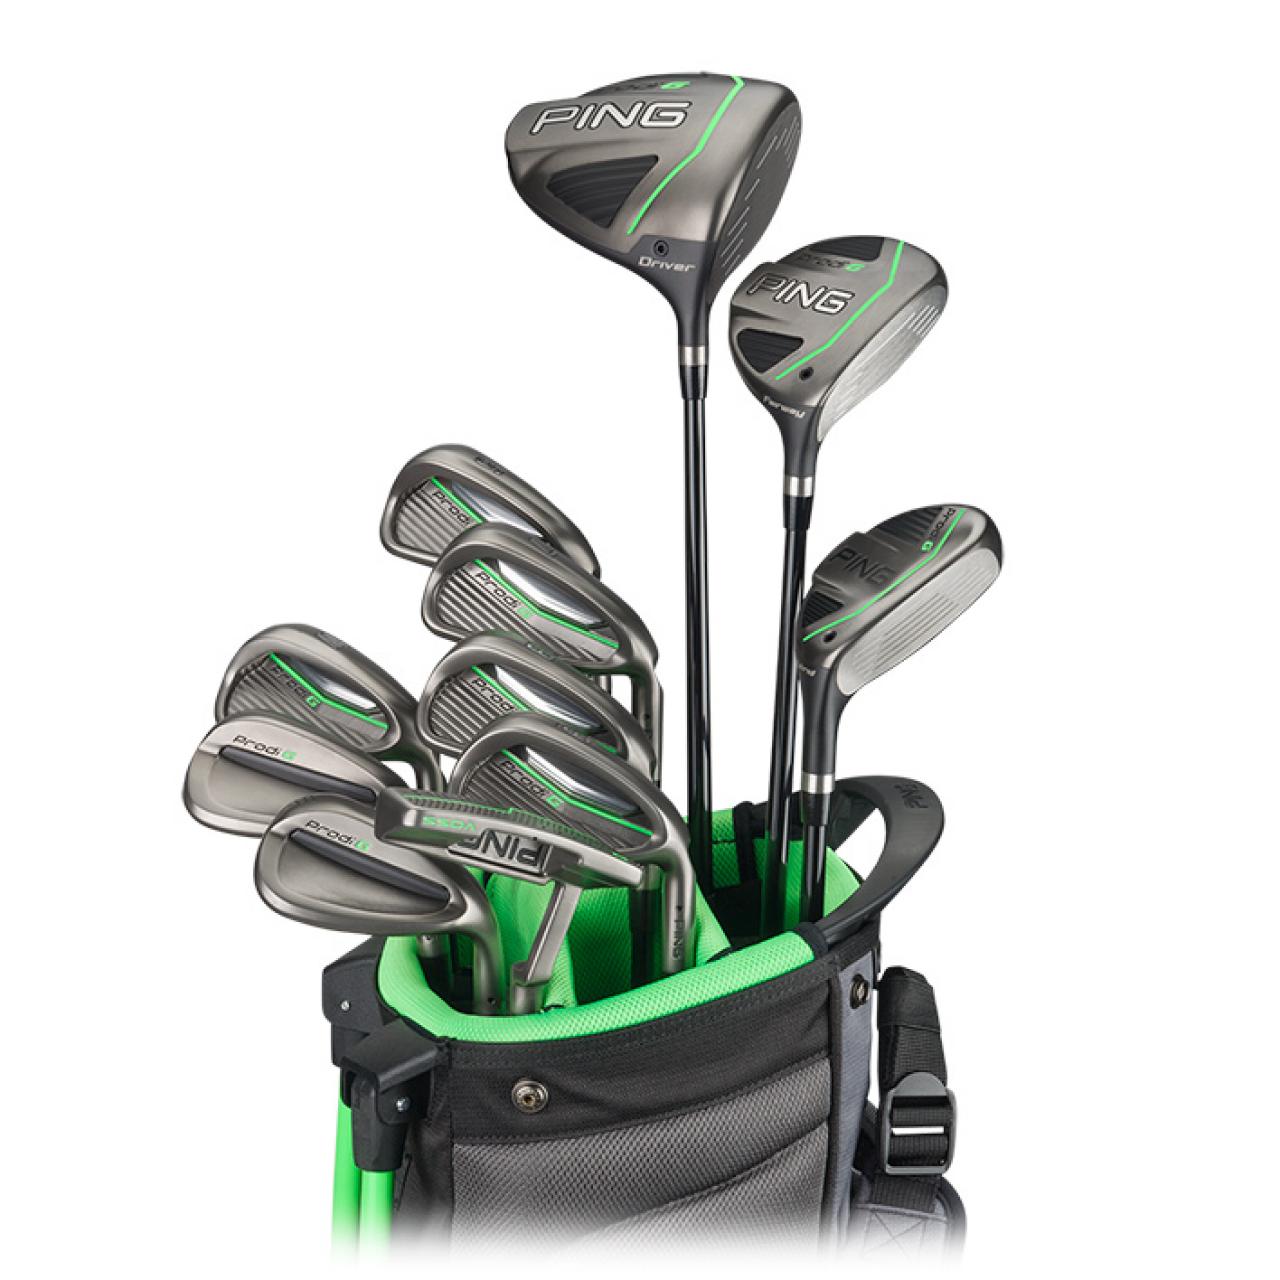 Ping offering Tele-Fitting experience to kids and parents for Prodi G junior set Golf Equipment Clubs, Balls, Bags GolfDigest